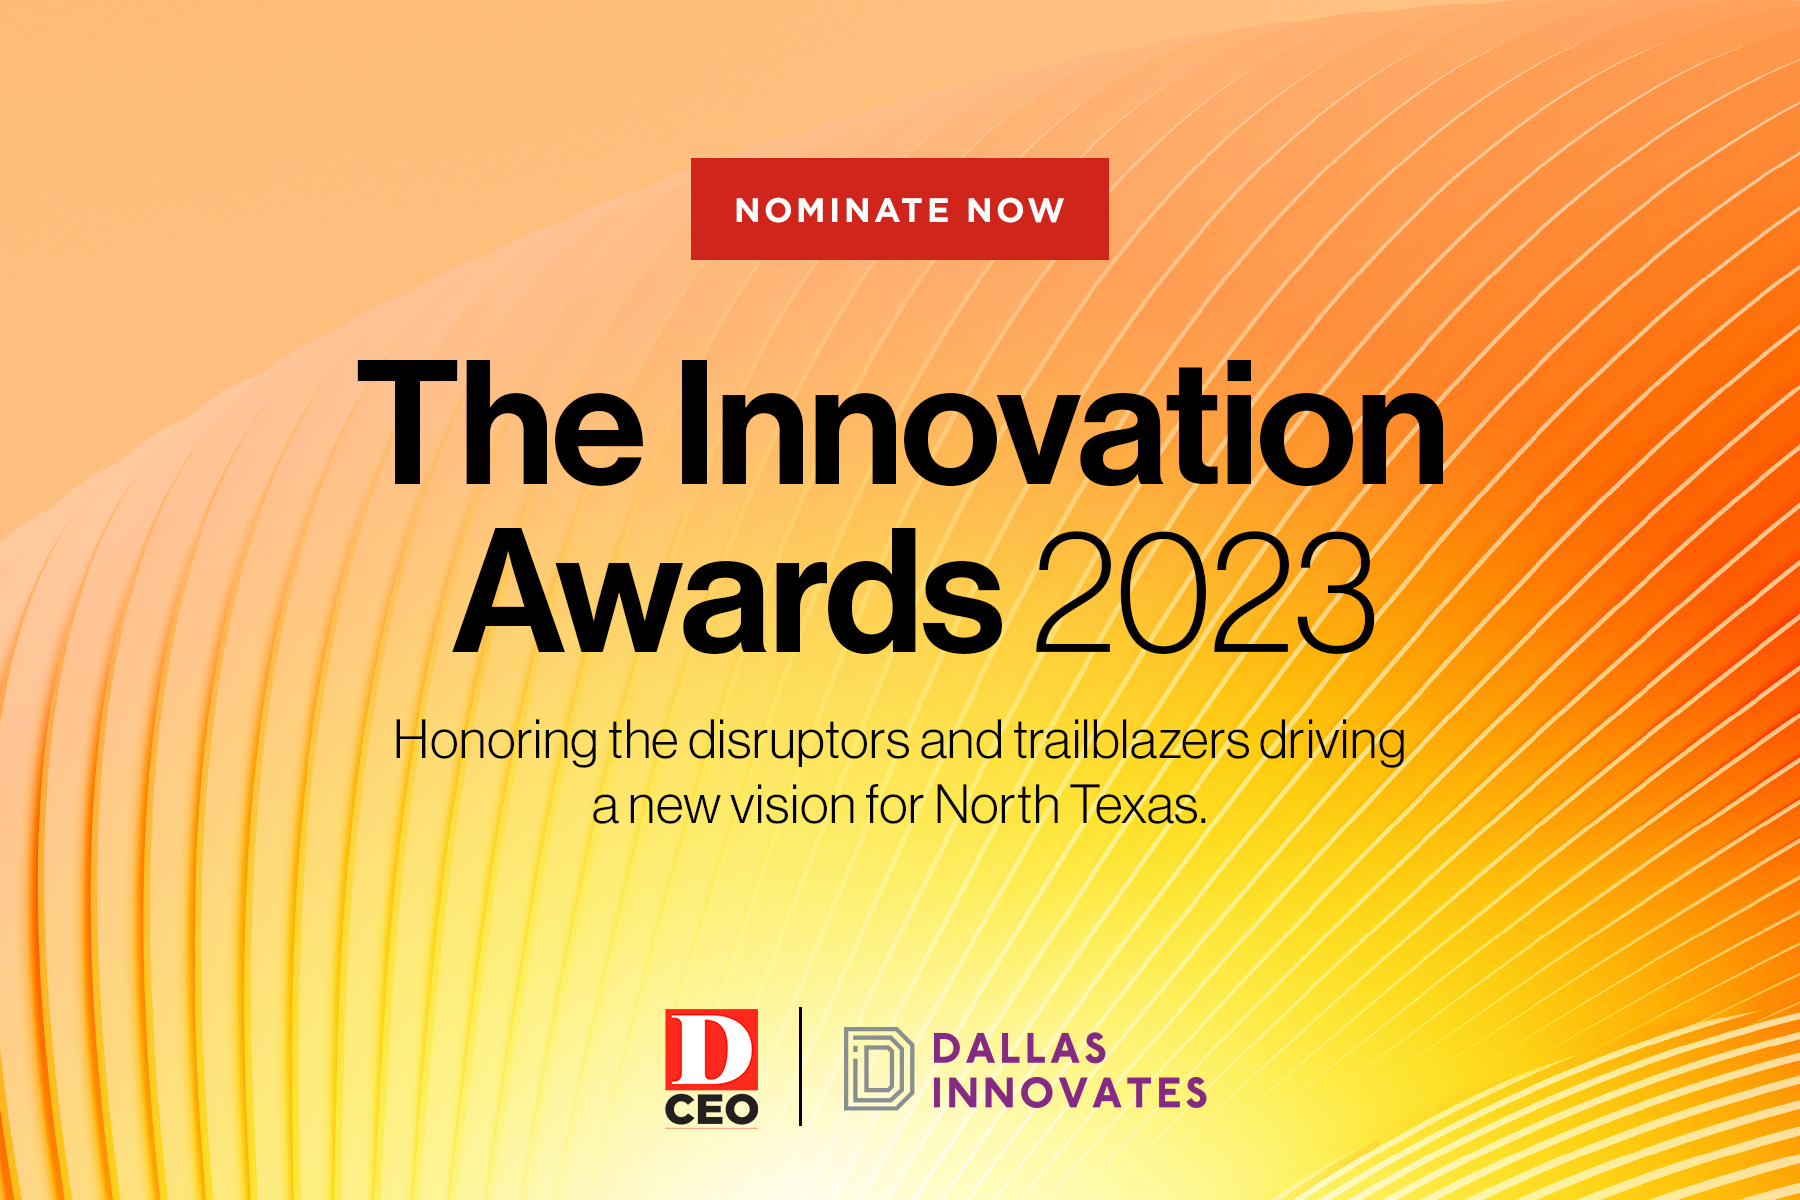 Nominate Now D CEO and Dallas Innovates Launch The Innovation Awards